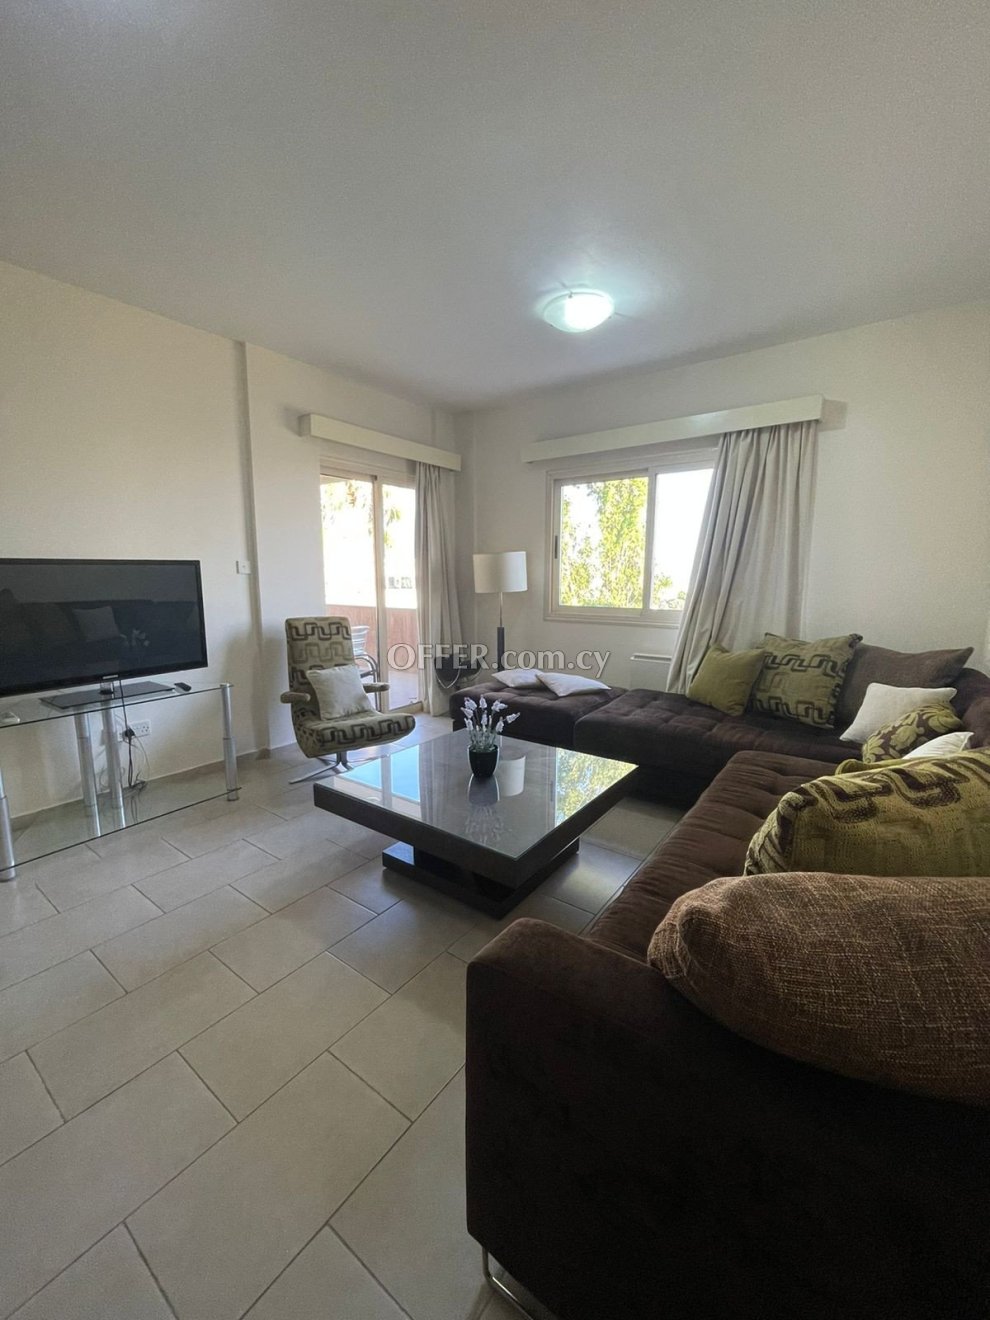 Apartment (Flat) in Agios Athanasios, Limassol for Sale - 6